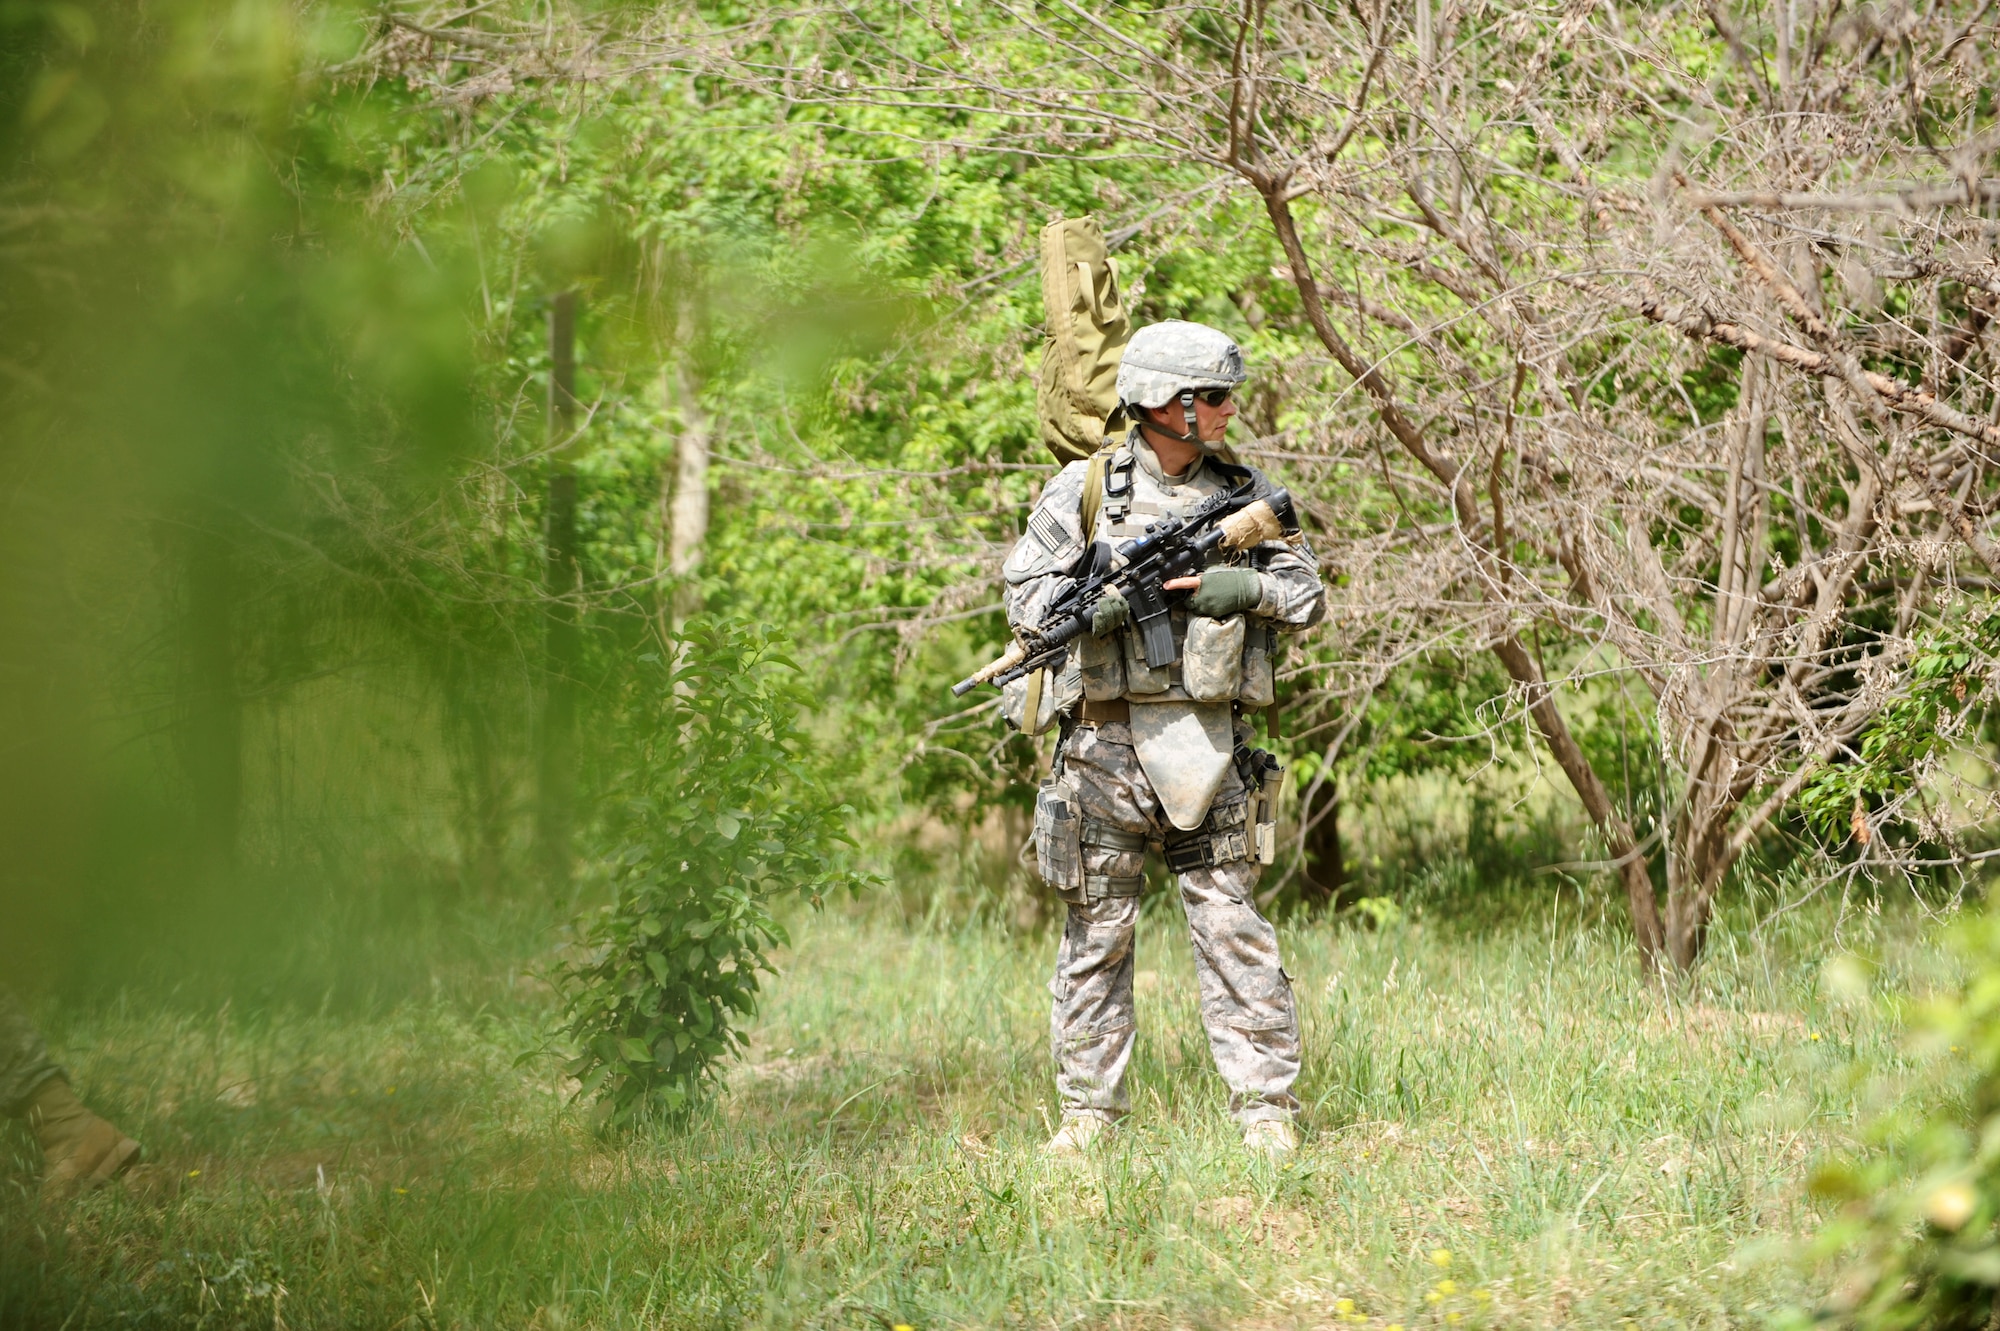 Senior Airman Brian Hafner conducts security during a patrol near Bakr Village April 9 in support of Operation Iraqi Freedom.  He is assigned to the 532nd Security Forces Squadron at Joint Base Balad, Iraq. (U.S. Air Force photo/Staff Sgt. James L. Harper Jr.)